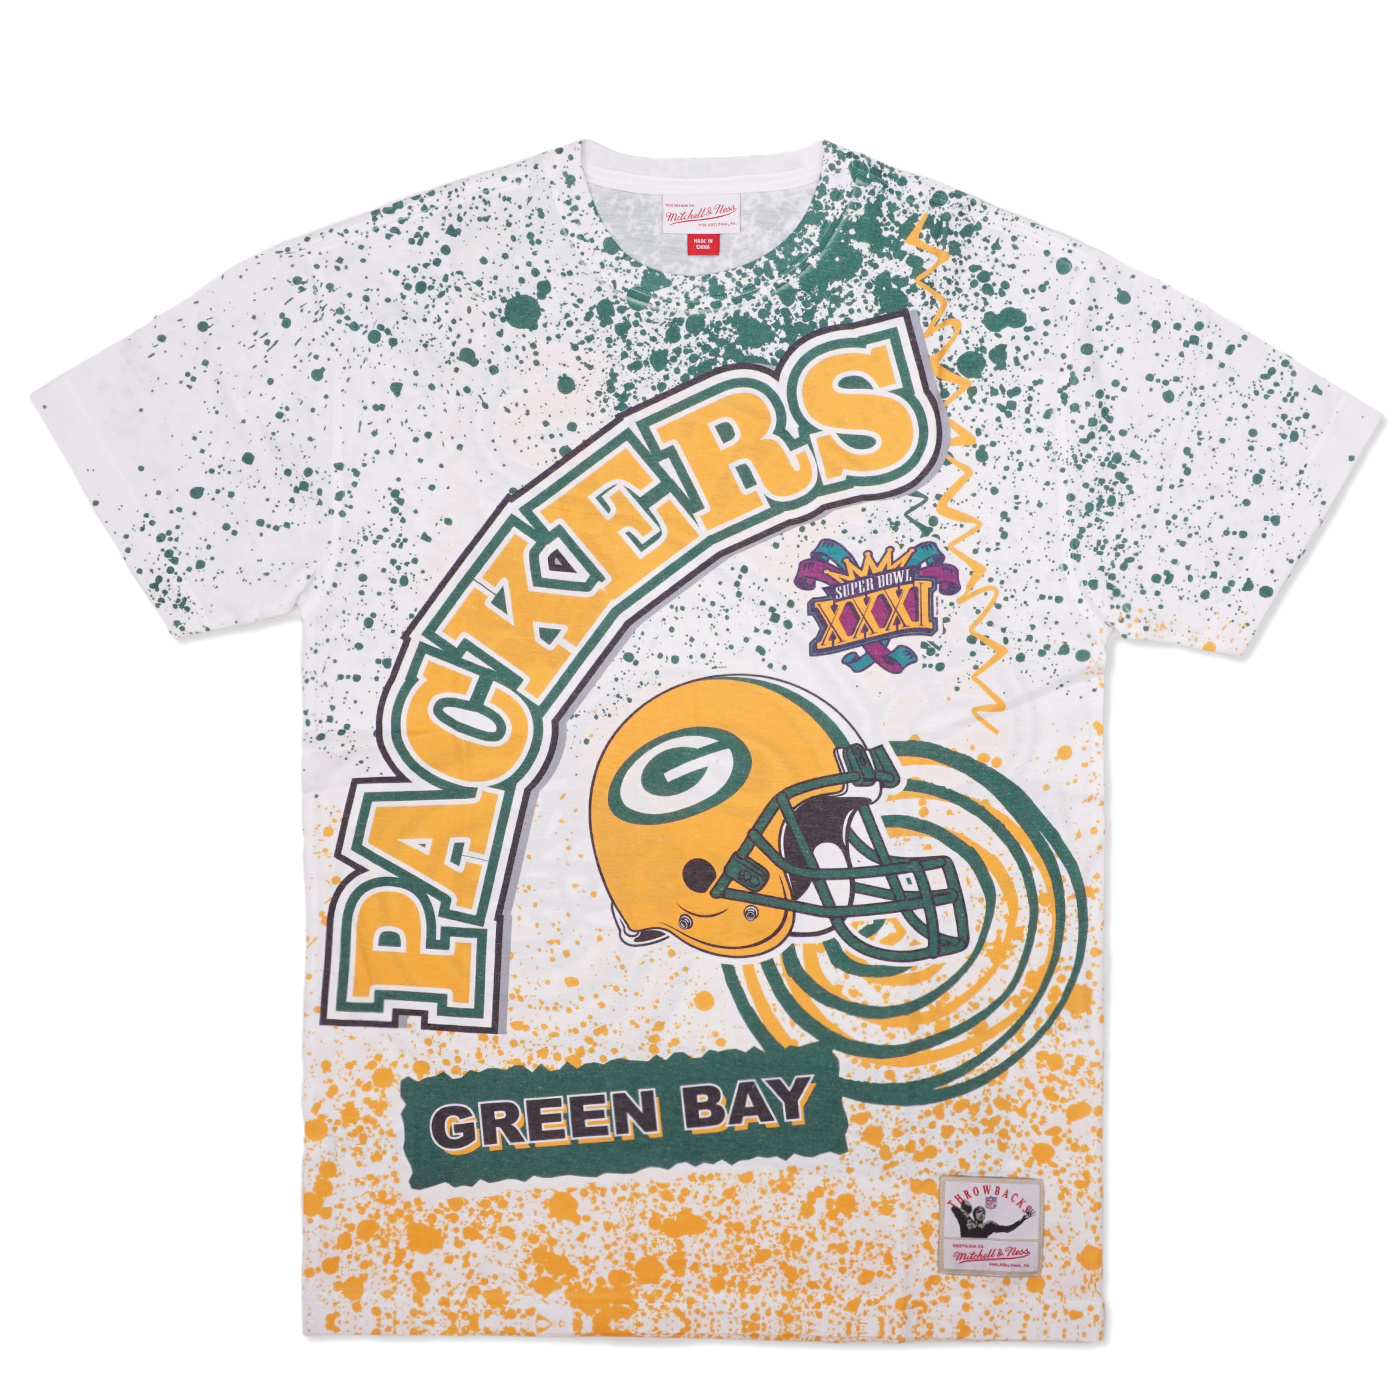 Men's Mitchell & Ness White Green Bay Packers Team Burst Sublimated T-Shirt Size: 3XL